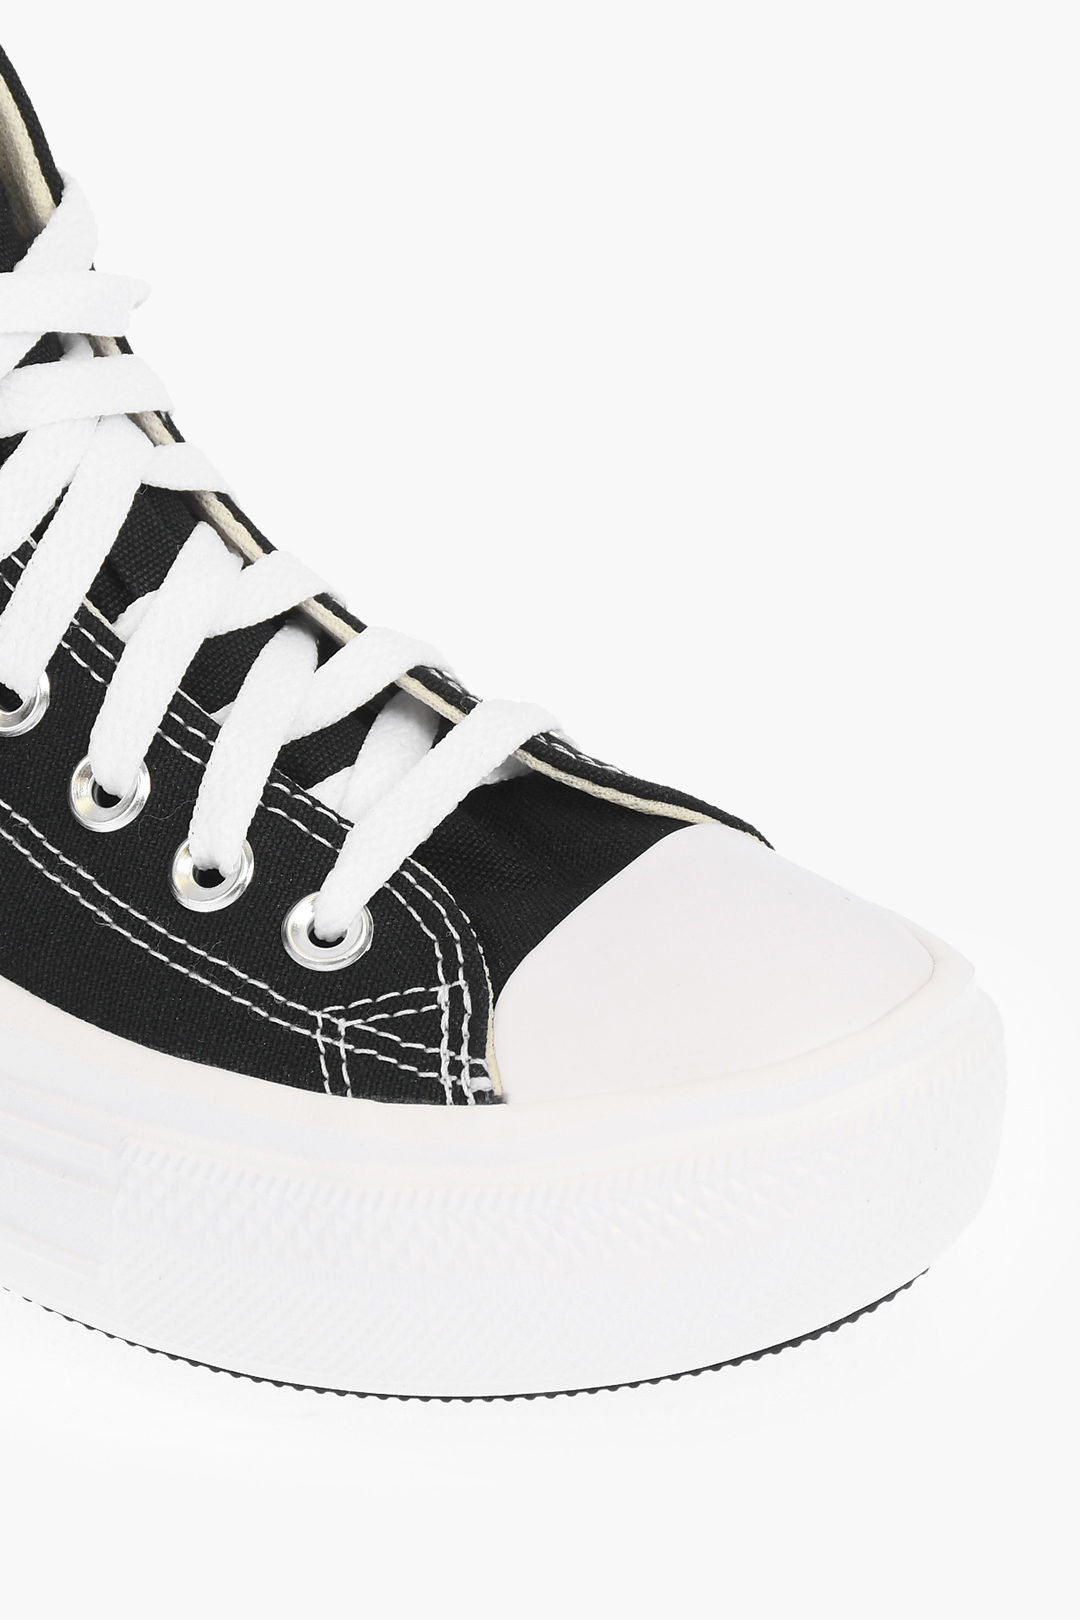 Converse CHUCK TAYLOR ALL STAR 4cm fabric MOVE top with platform women - Glamood